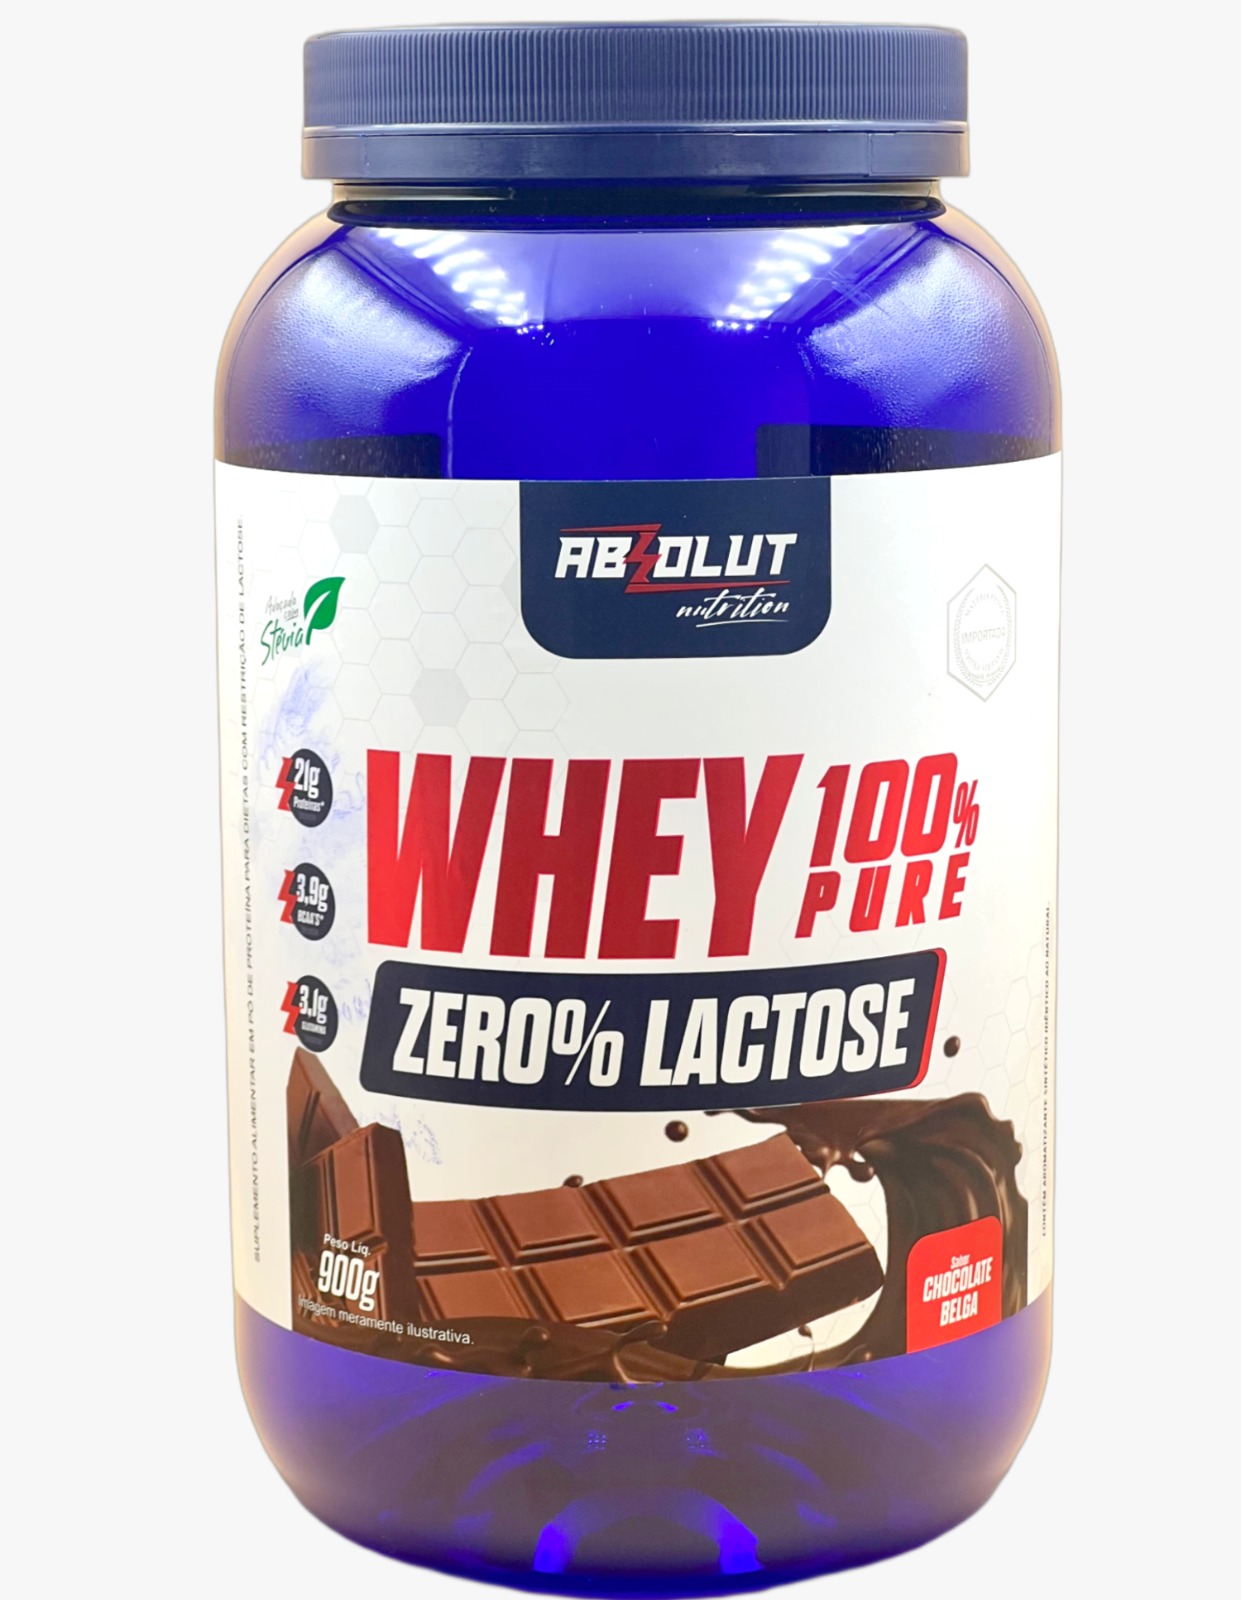 WHEY 100% PURE ZERO LACTOSE ABSOLUT NUTRITION - 900G